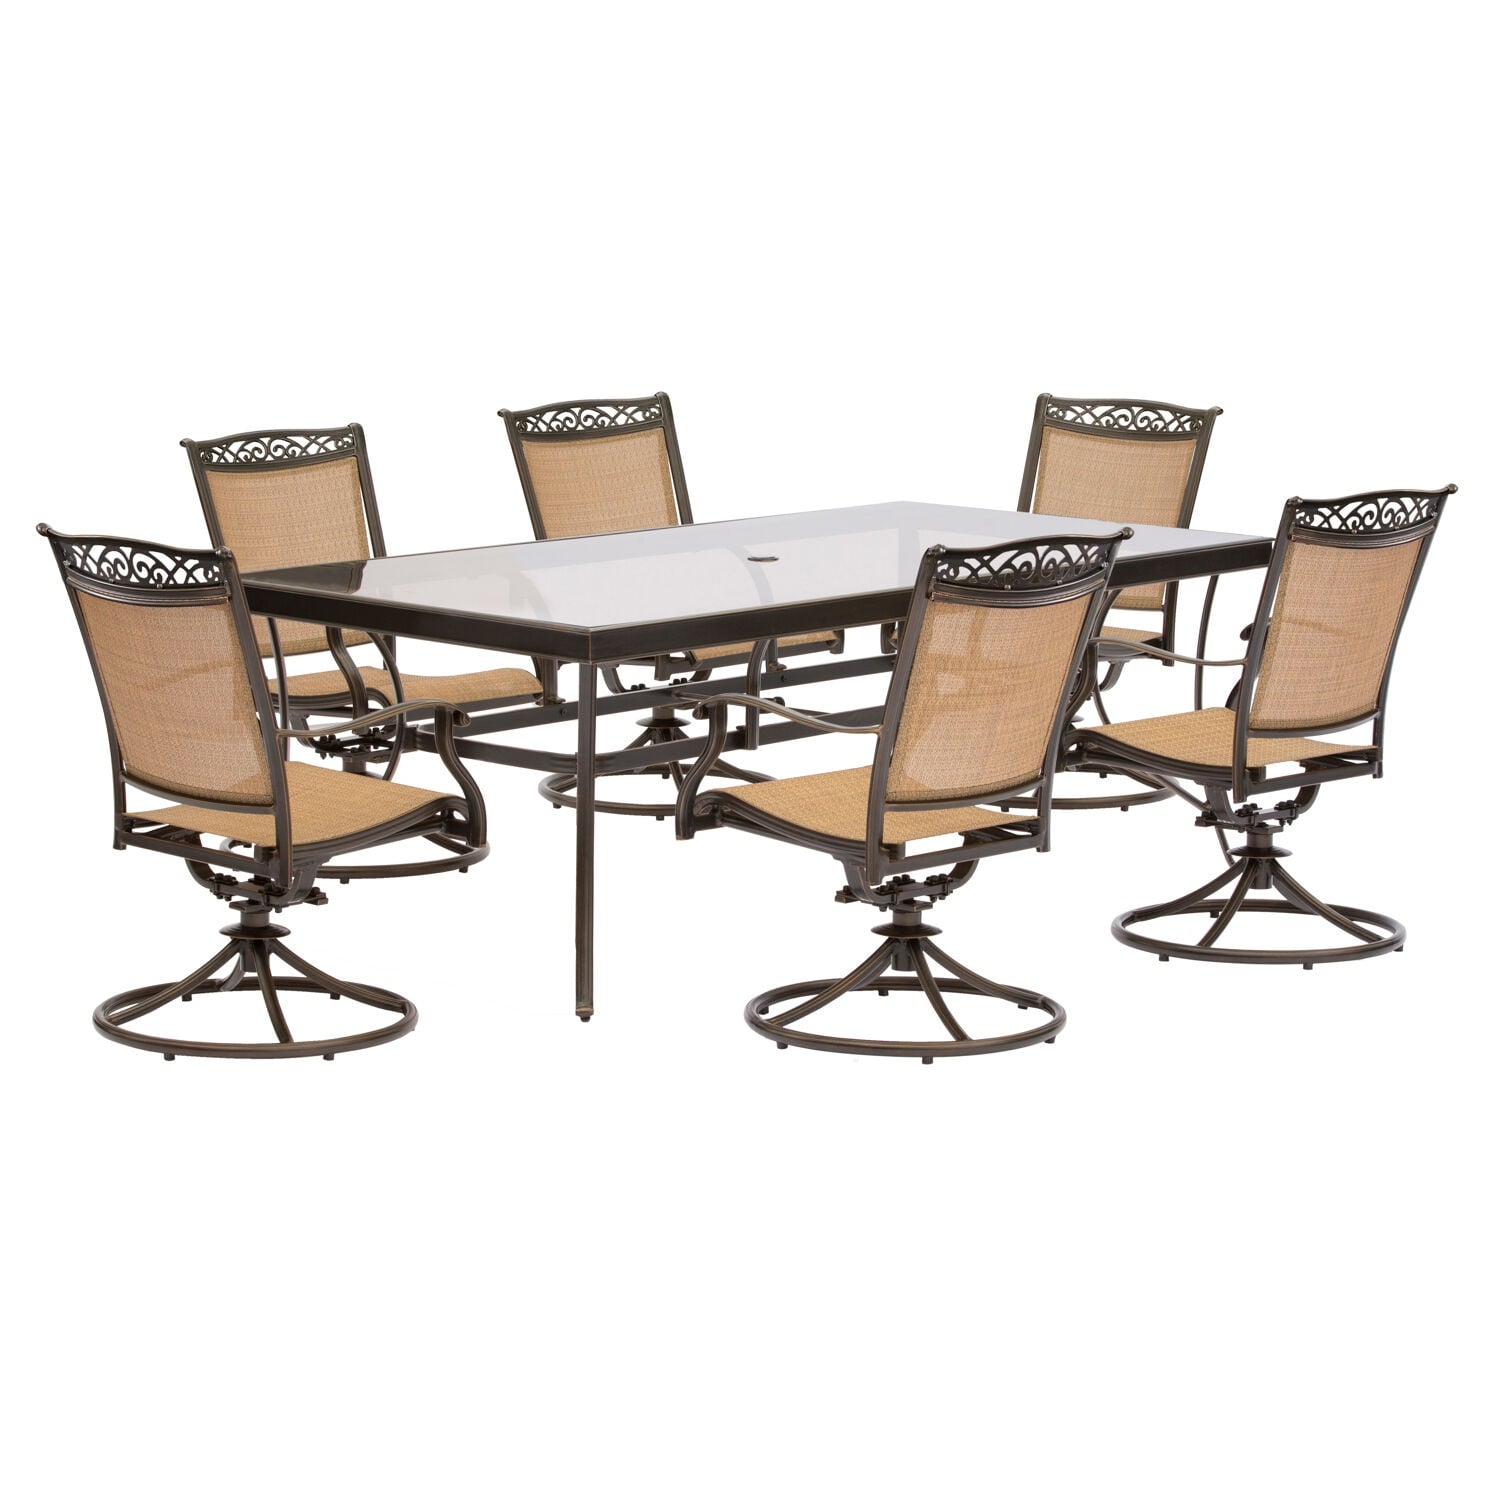 Hanover Fontana 7-piece Dining Set With Six Sling Swivel Rockers And An Extra Large Glass-top Dining Table